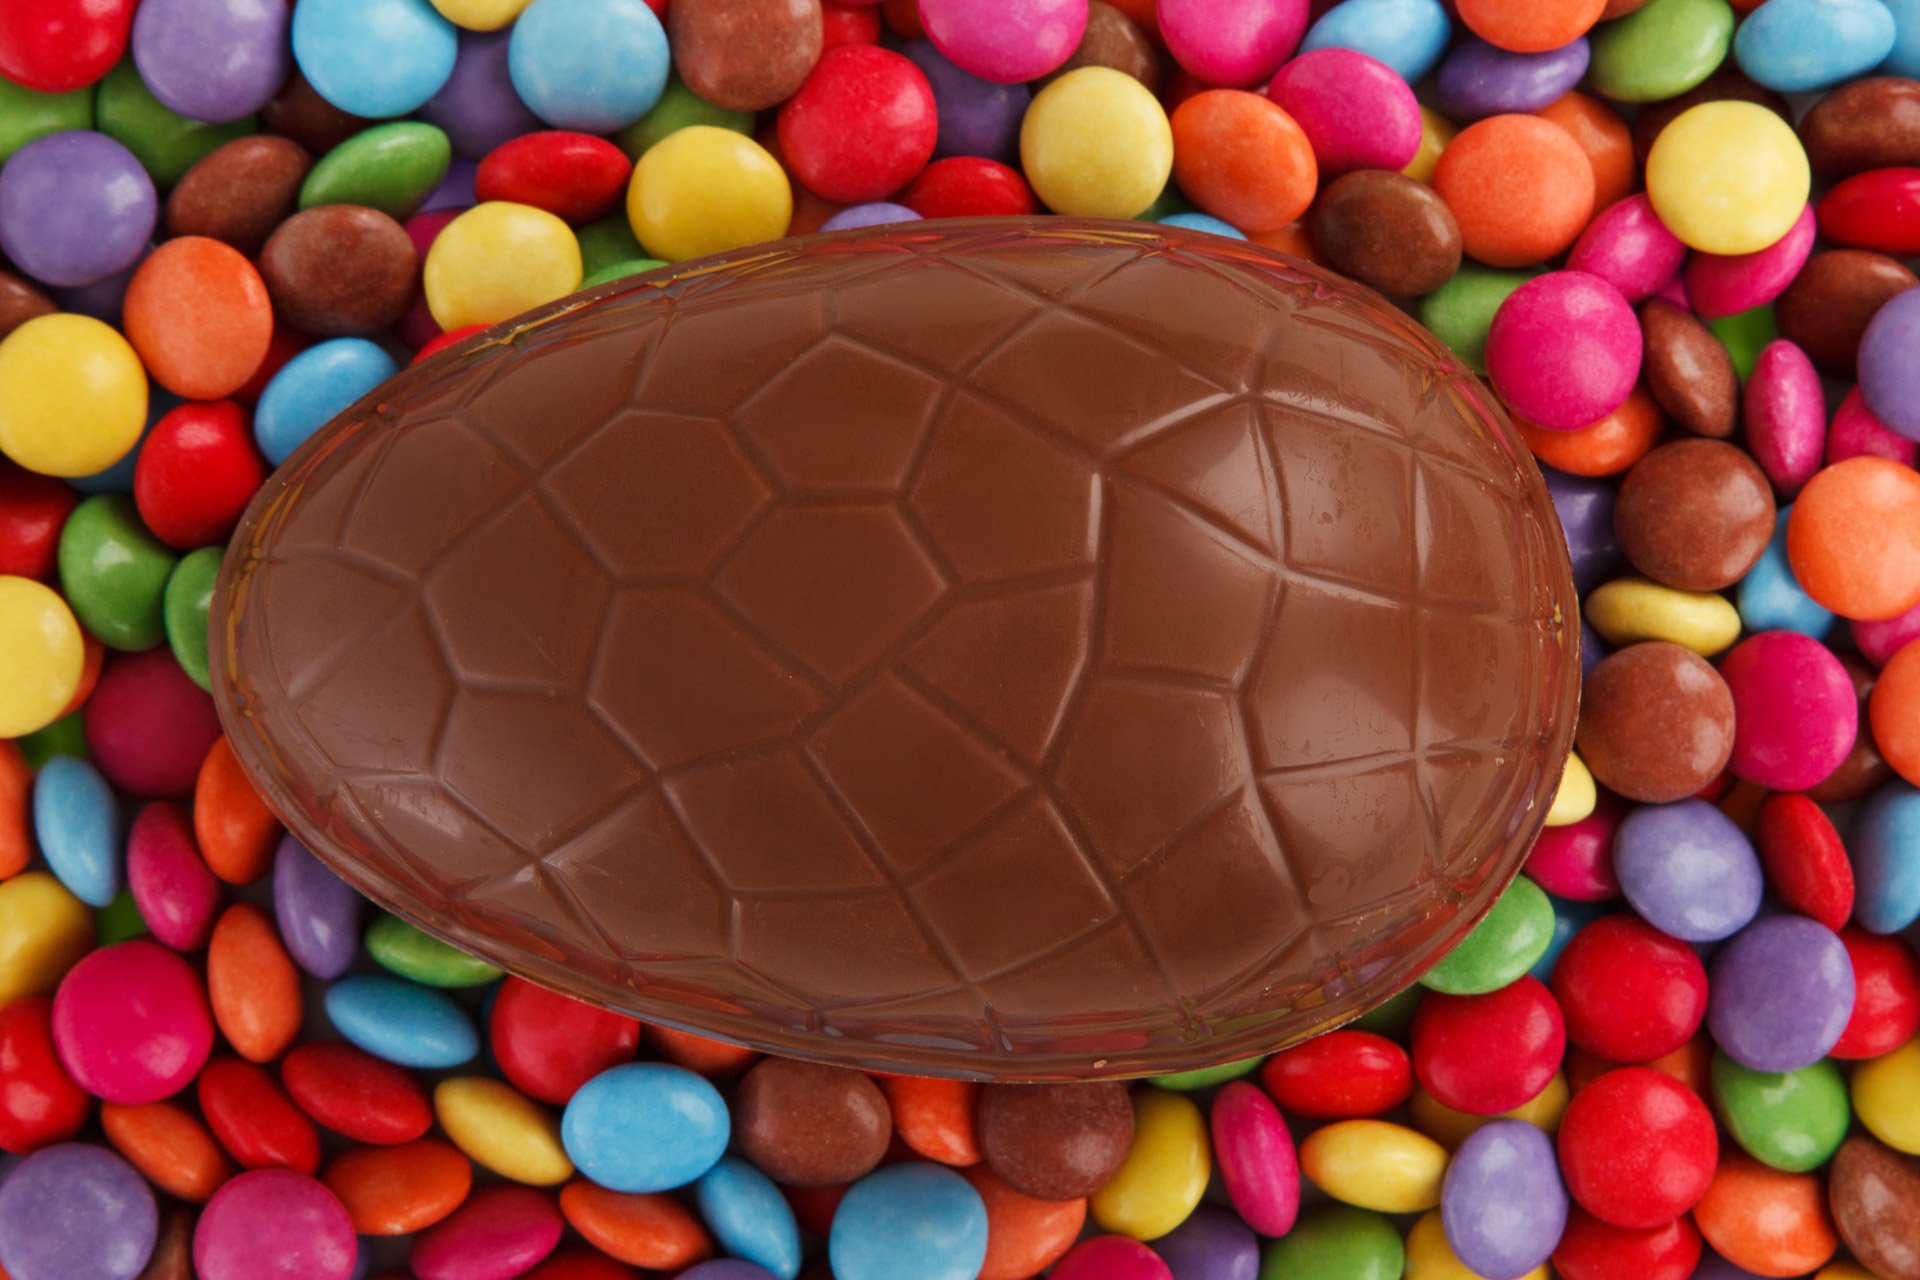 Chocolate Egg With Candy by Petr Kratochvil HD Wallpaper